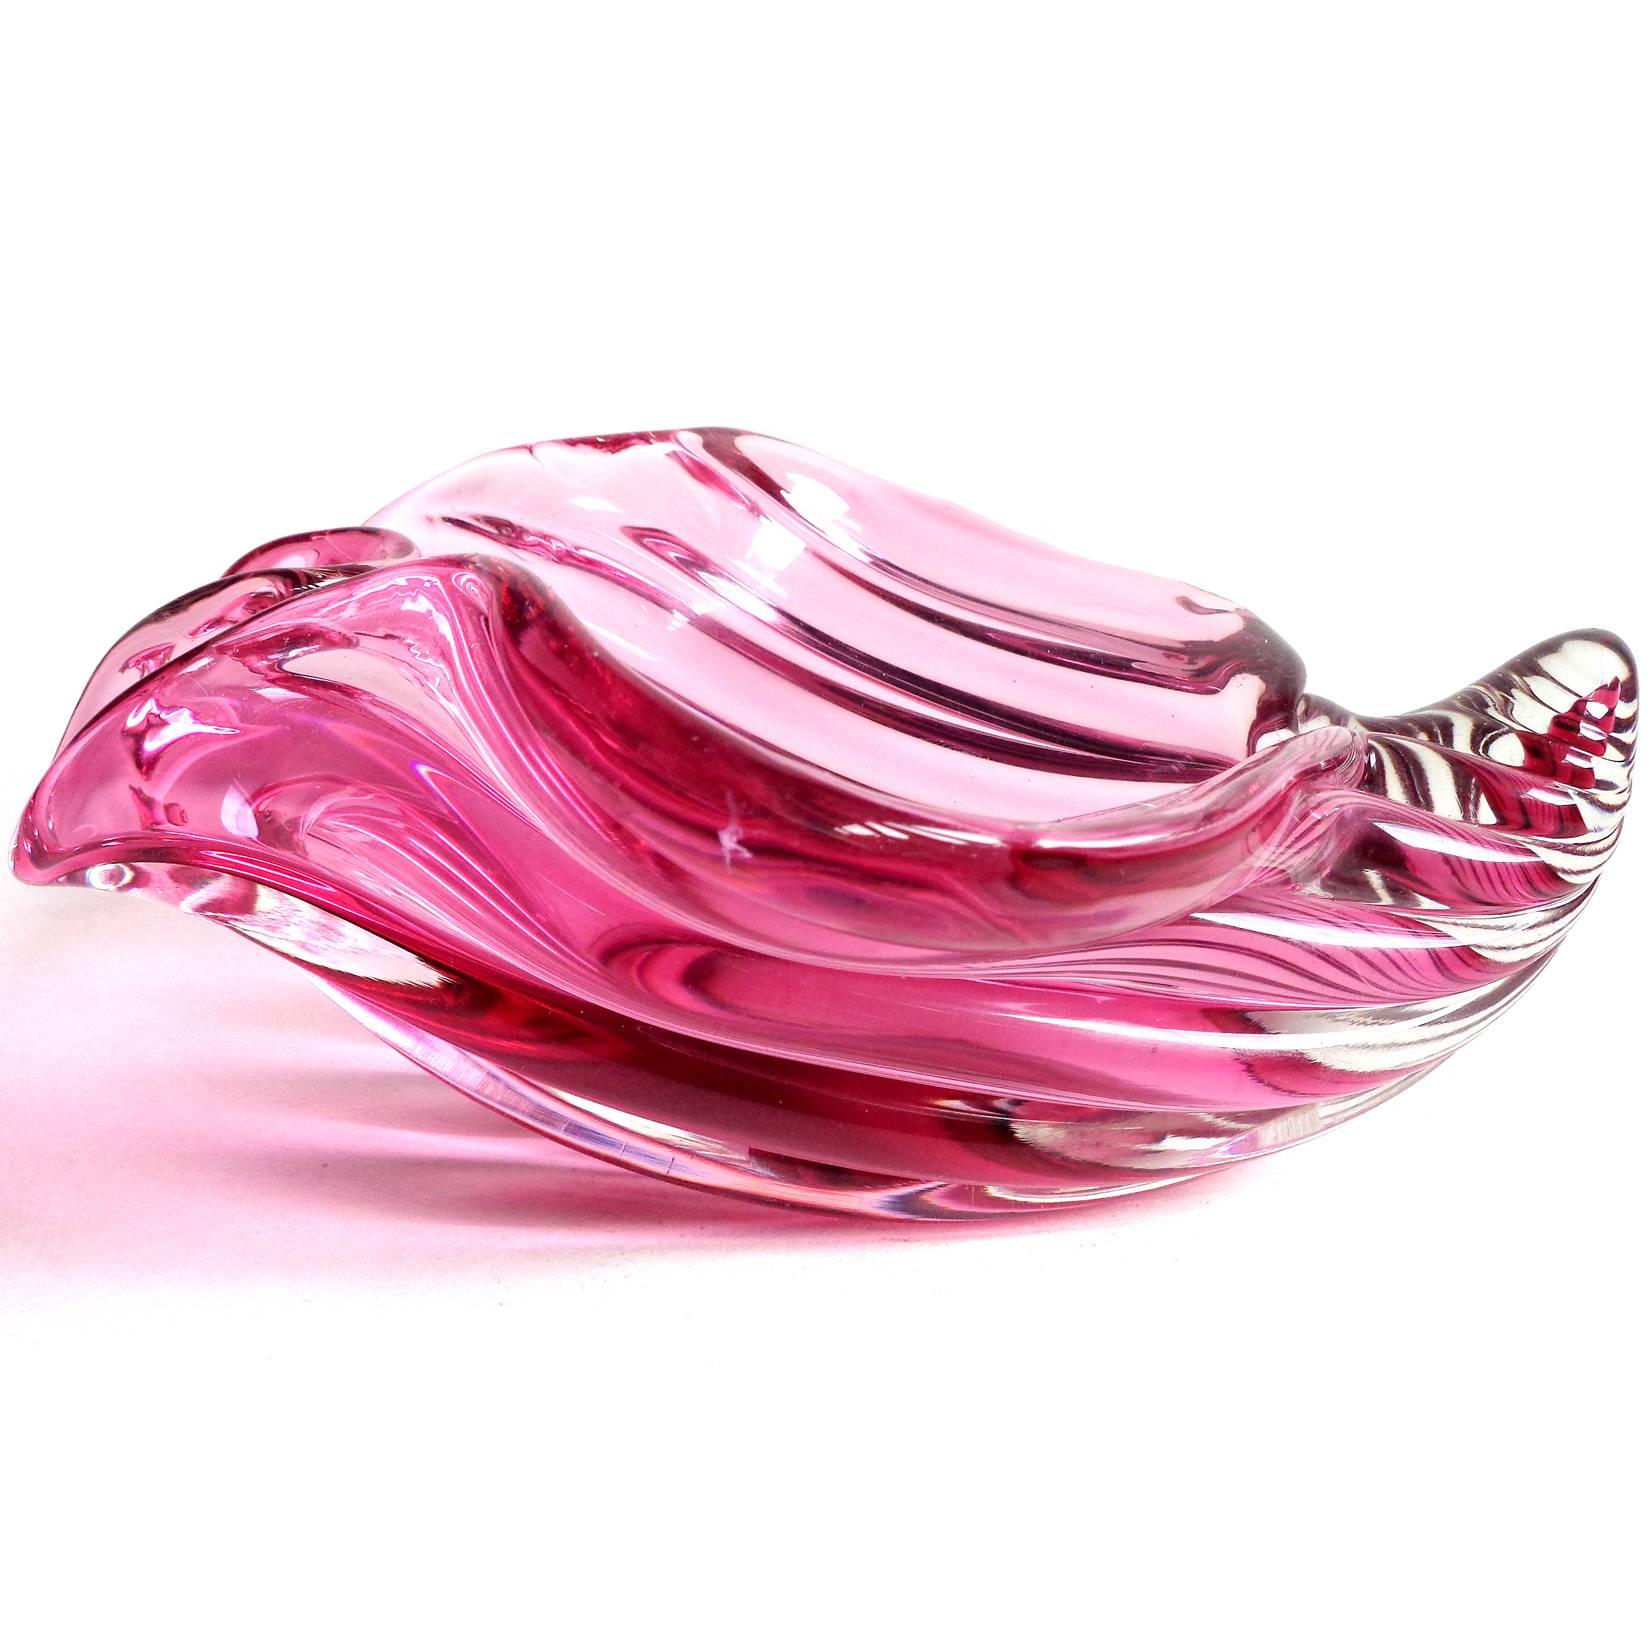 Free shipping worldwide! See details below description.

Beautiful Murano handblown Sommerso pink art glass seashell sculptural bowl. Documented to Alfredo Barbini, circa 1950s-1960s. Gorgeous shape and color. Perfect for any Marine or Ocean